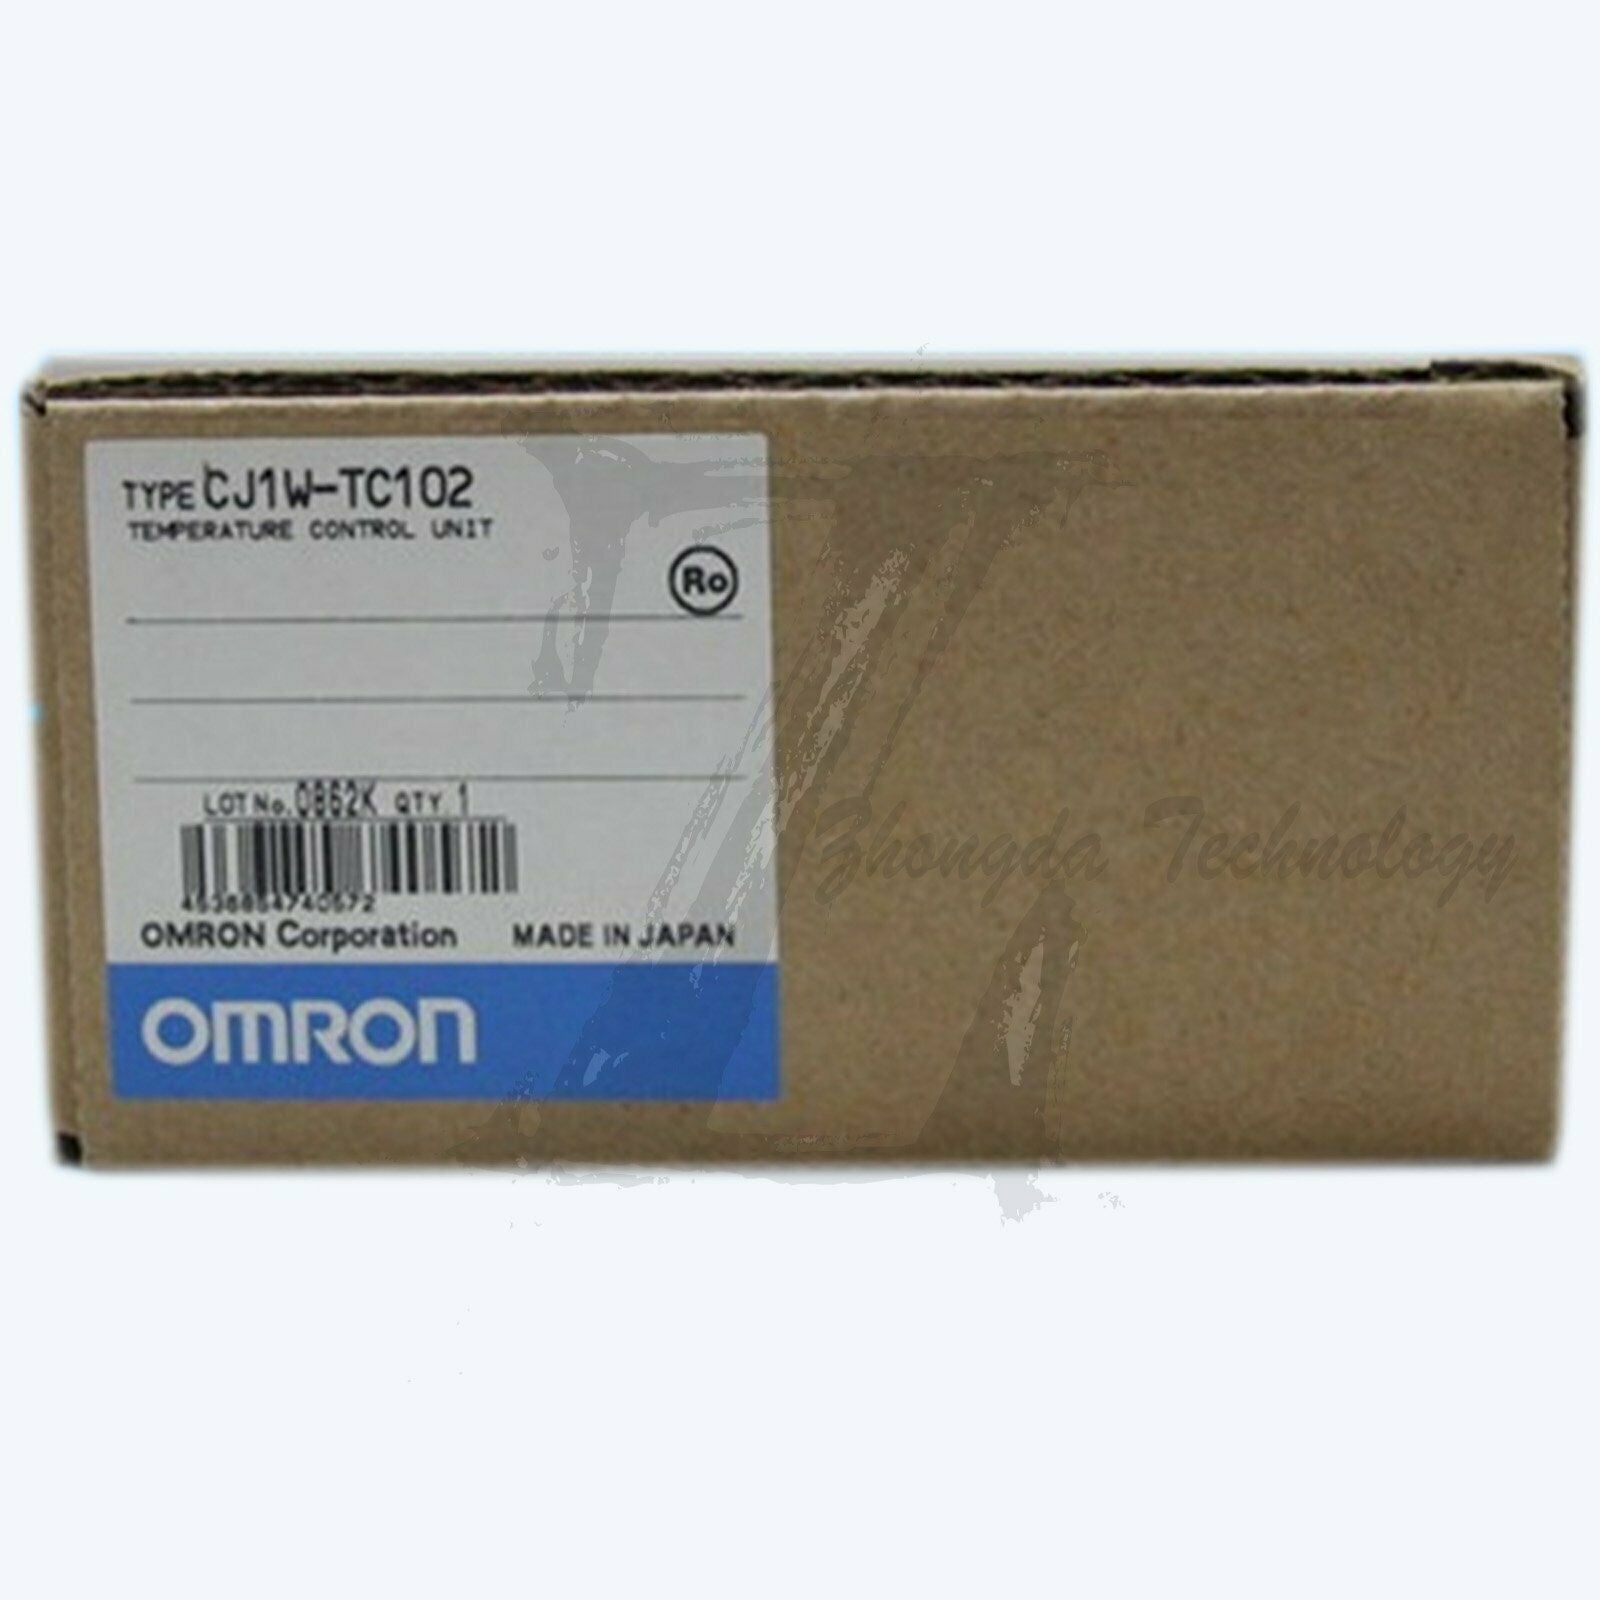 1pc new Omron programmable controller CJ1W-TC102 one year warranty KOEED 500+, 80%, import_2020_10_10_031751, Omron, Other